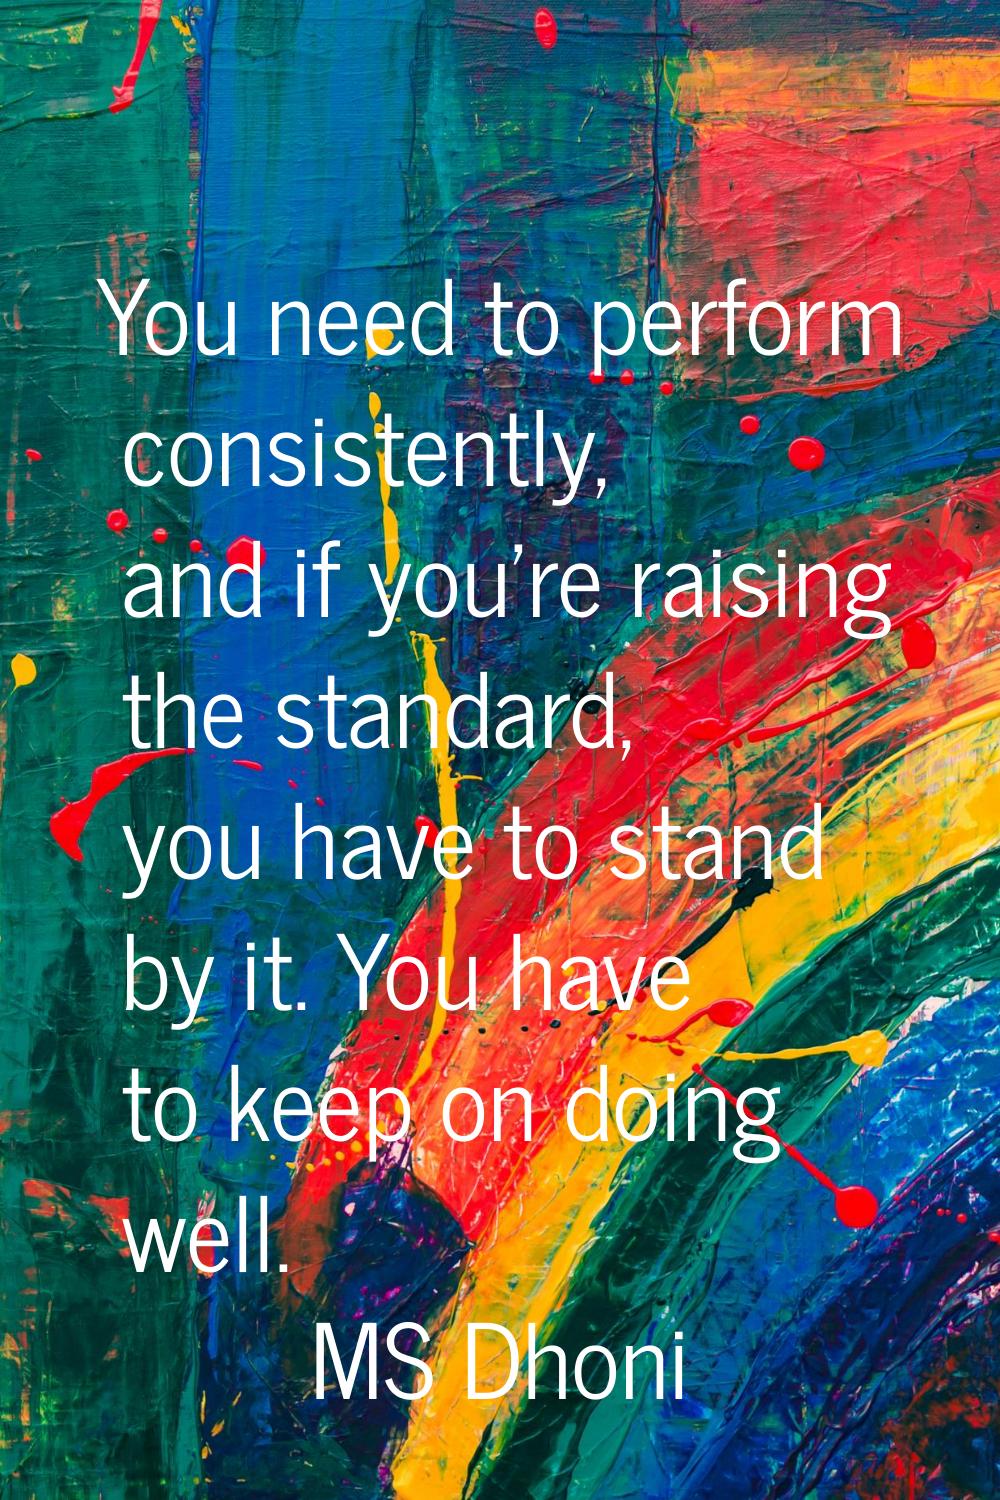 You need to perform consistently, and if you're raising the standard, you have to stand by it. You 